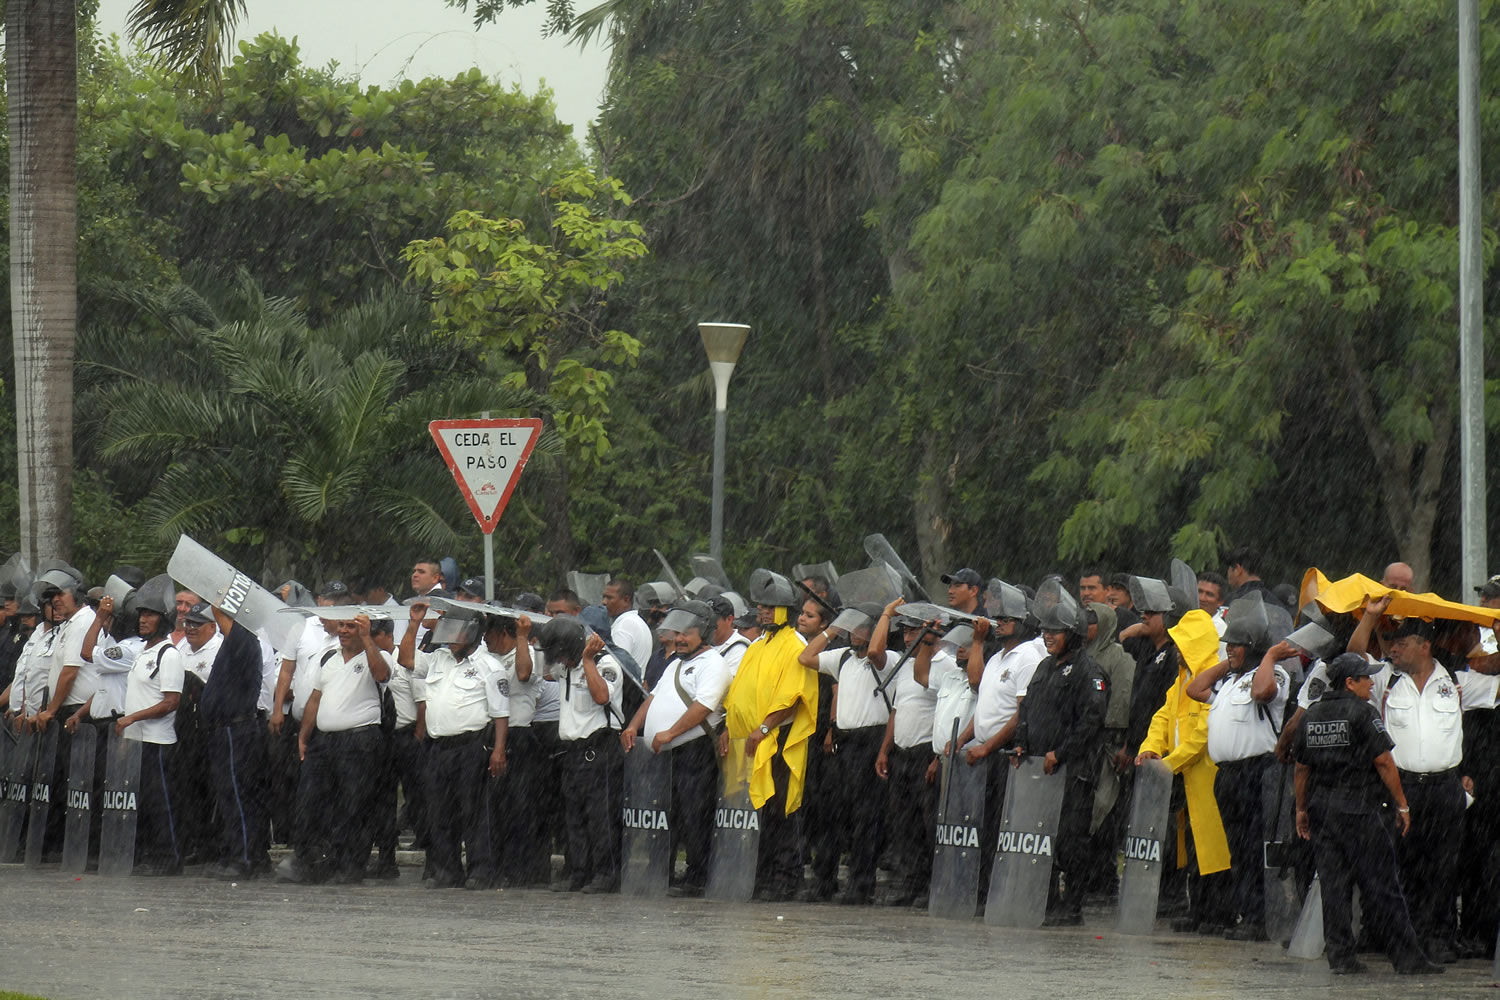 Riot police guarding the entrance of the hotel from protesting teachers stand under heavy rains in the Caribbean resort city of Cancun, Mexico, on Tuesday.